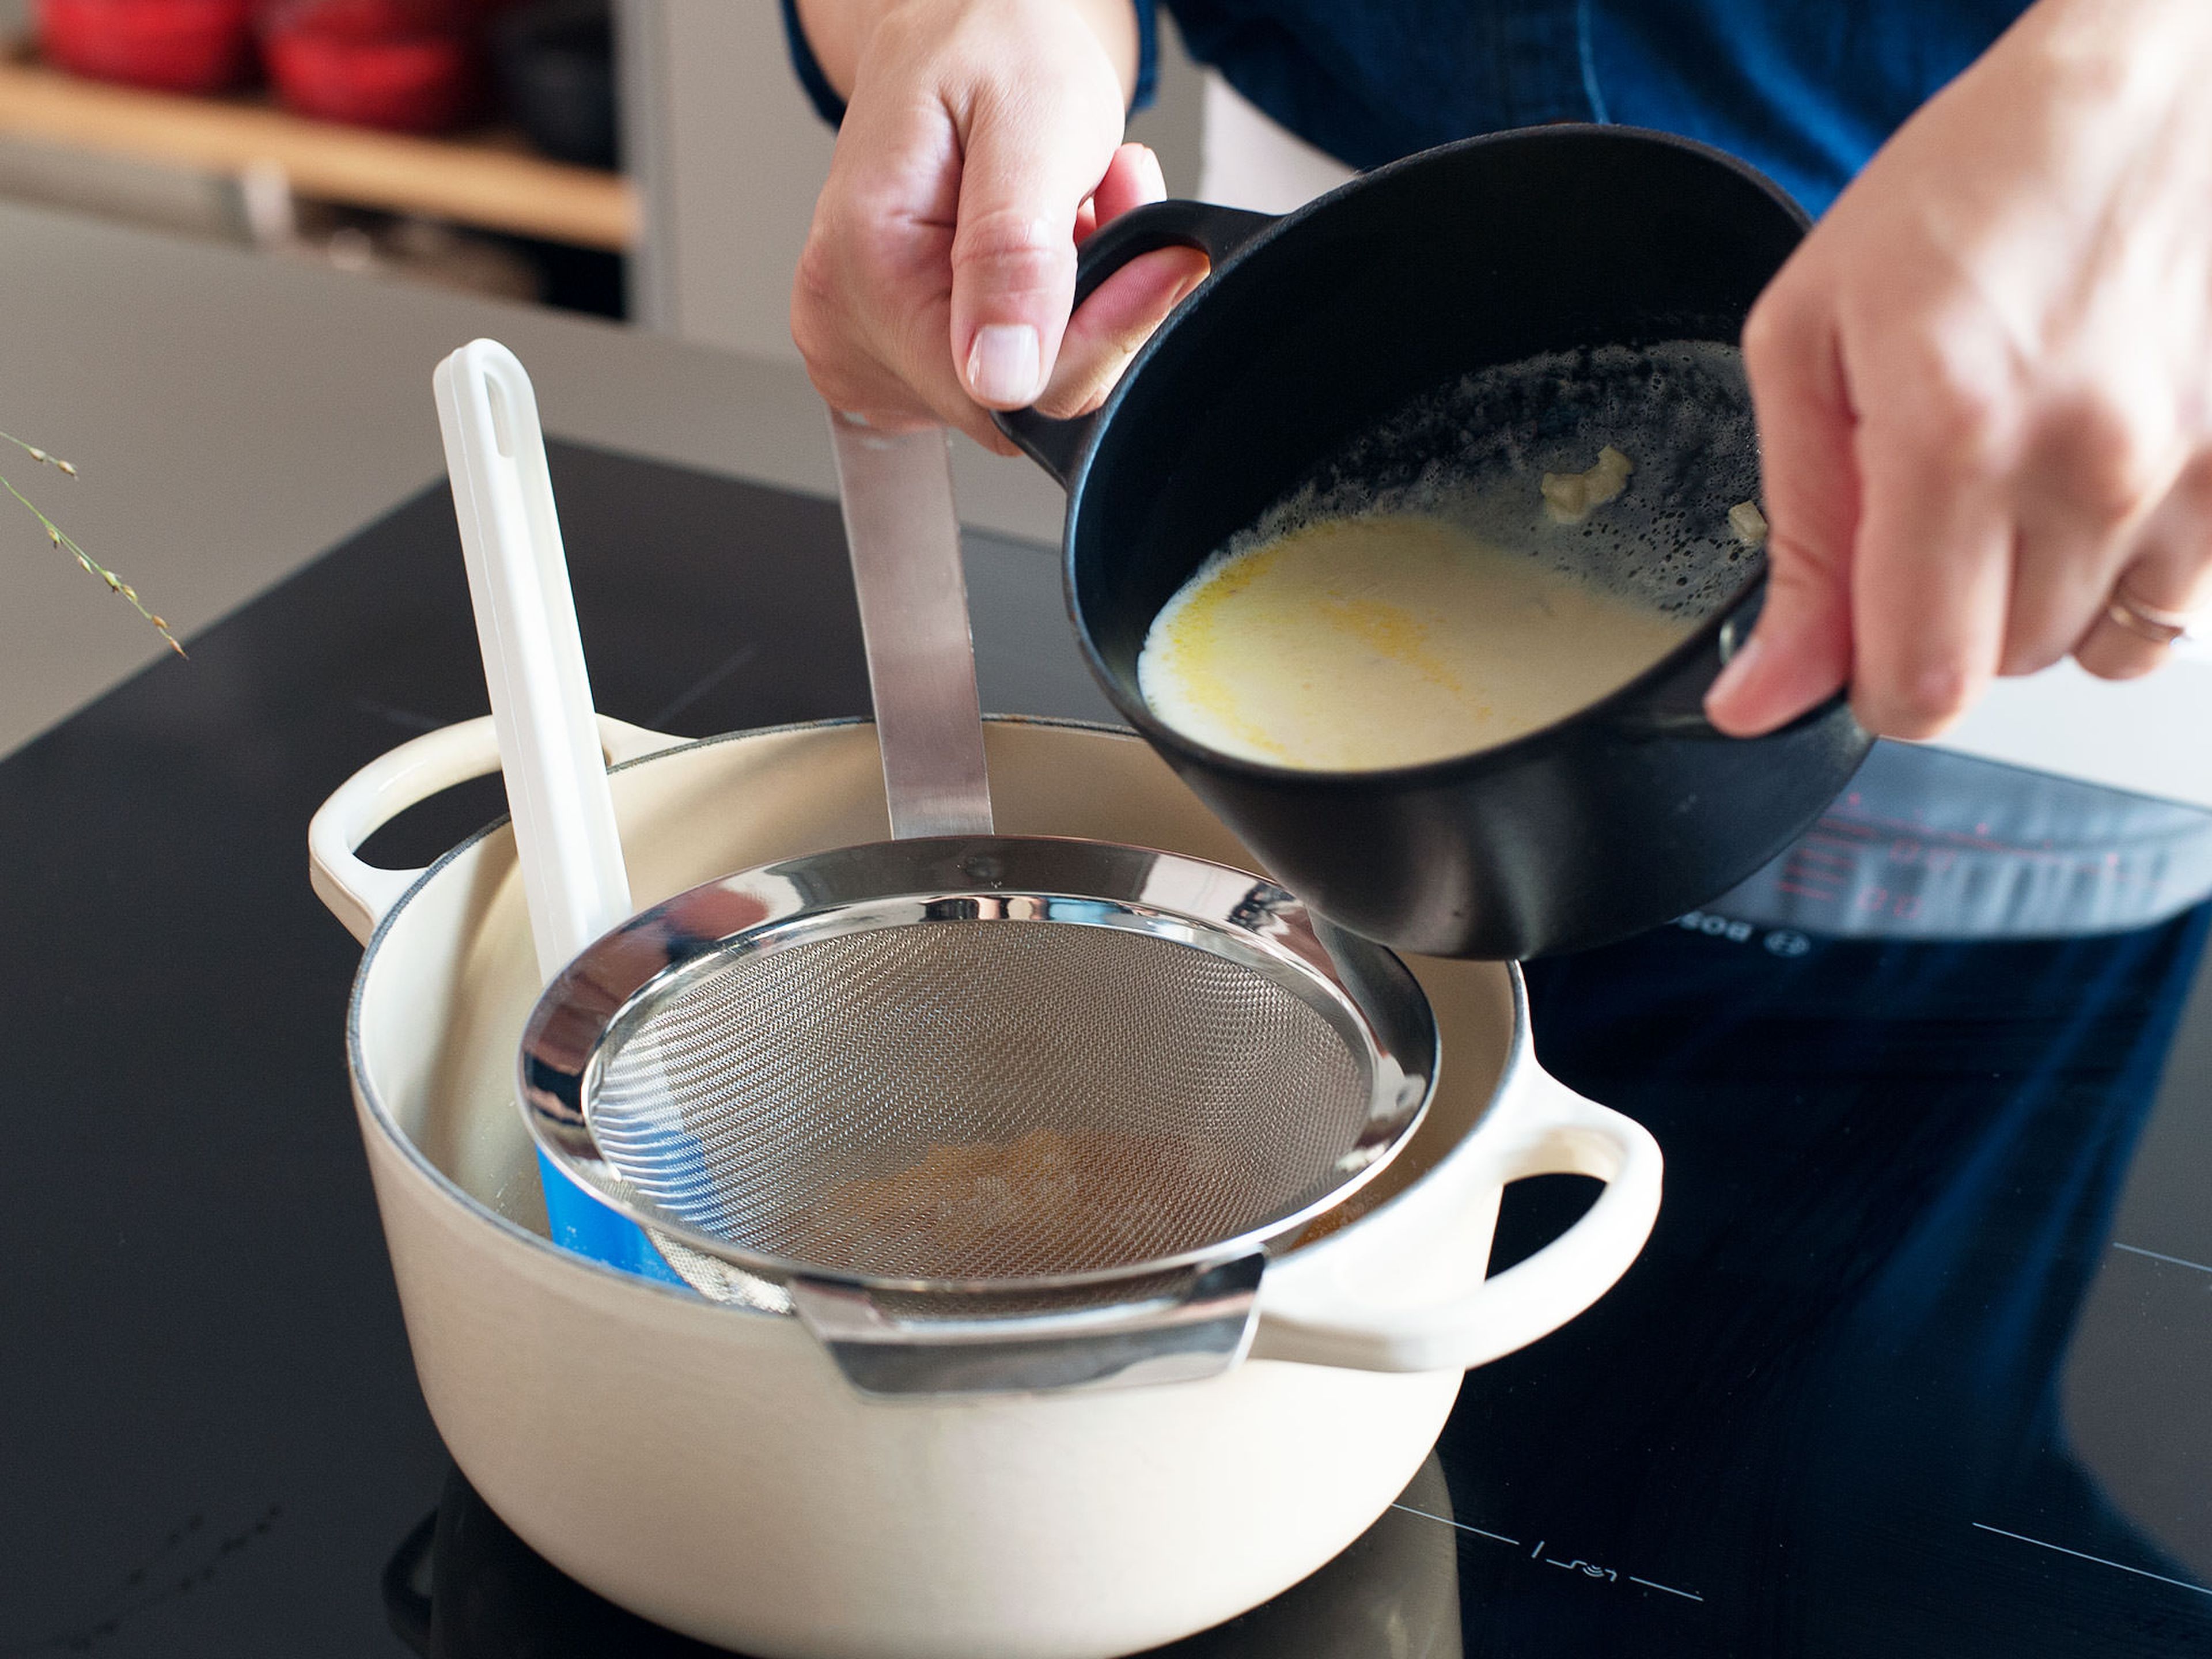 In a medium saucepan, slowly warm heavy cream until it just comes to a boil. Remove from heat and add chopped ginger; cover and let steep for 30 minutes. Strain cream to remove ginger.